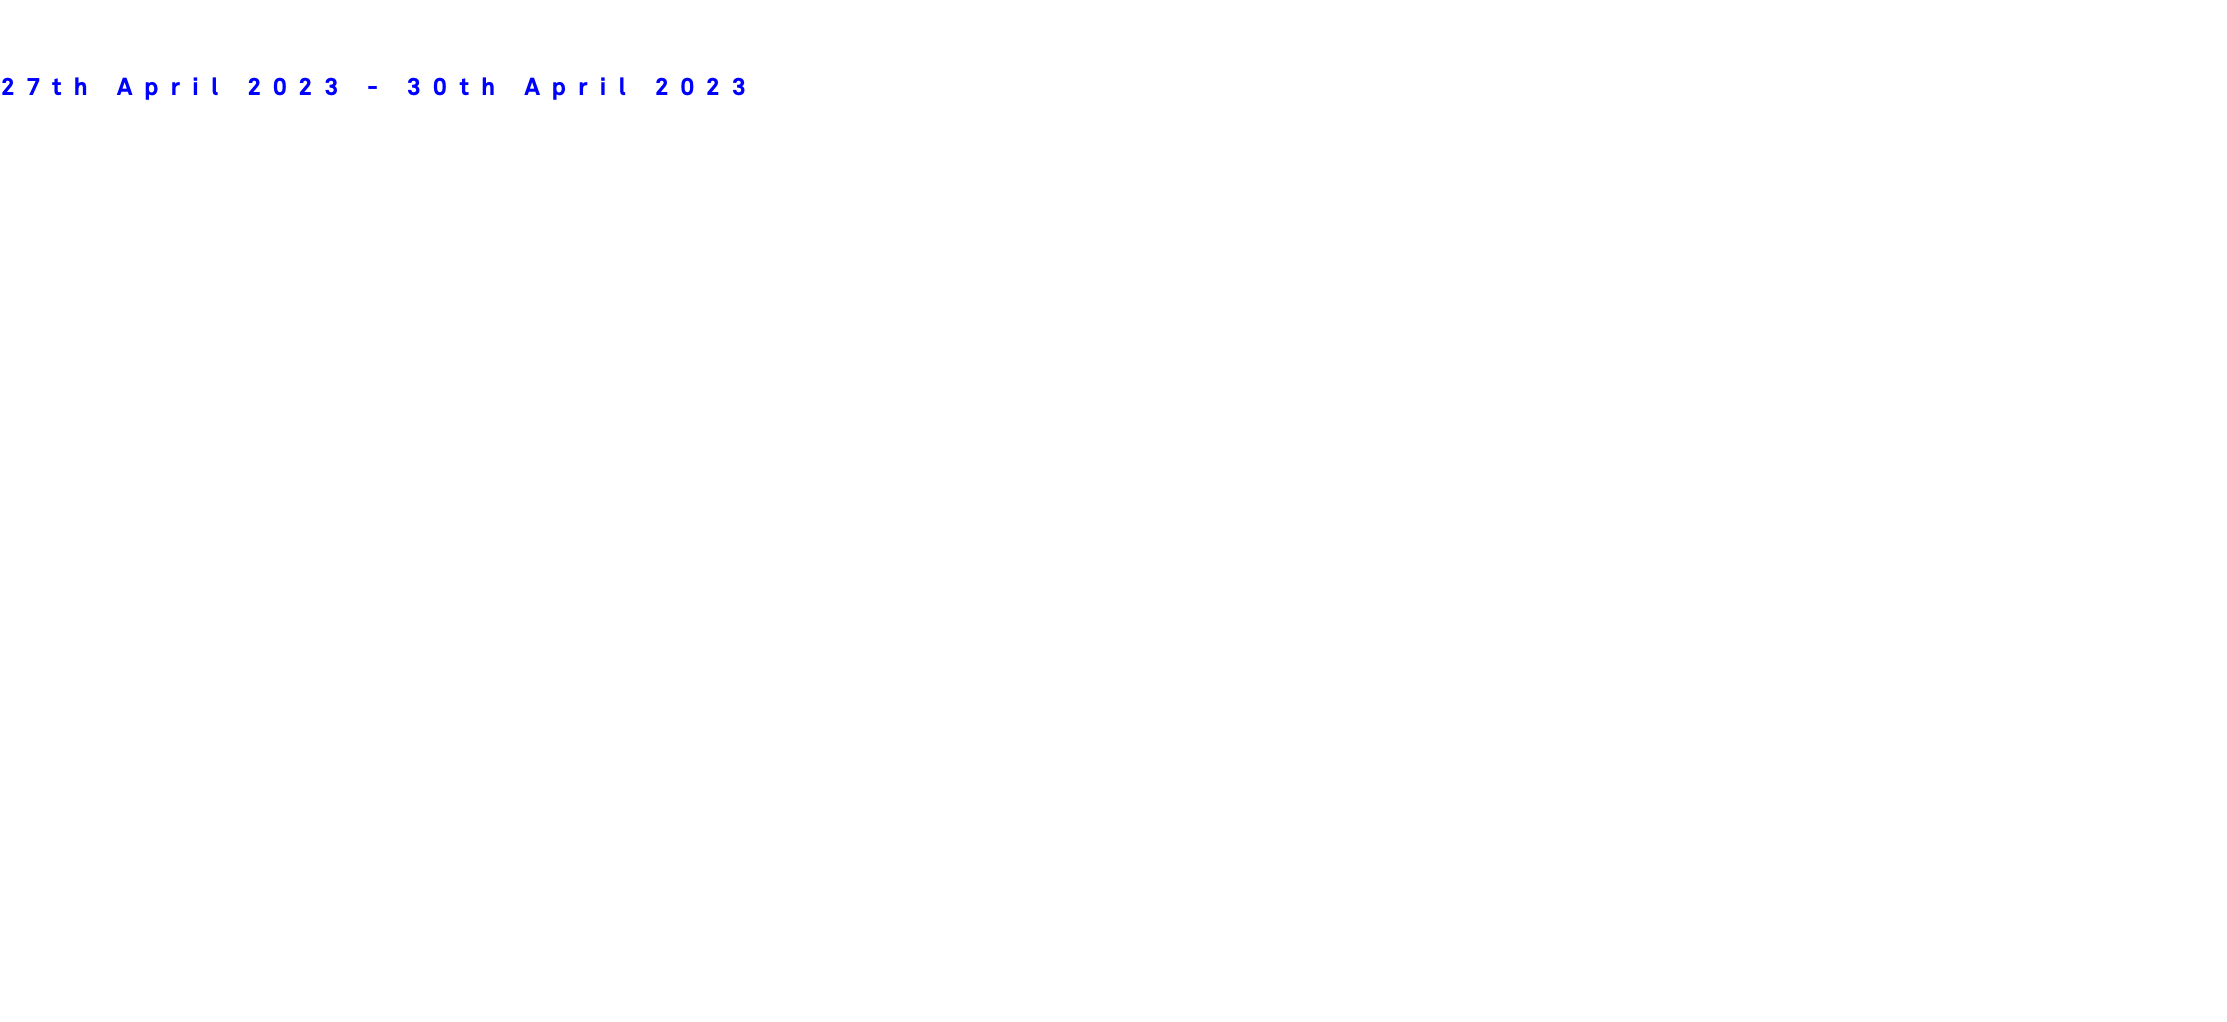 FILET 27th April 2023 - 30th April 2023 ABC OFFICE PARTY ABC OFFICE STAFF LIST.
Arnaud Desjardin, Claudia de la Torre, Duncan Wooldridge, George Grace Gibson, John MacLean, Jonathan Lewis, Jonathan Schmidt-Ott, Louis Porter, MacDonaldStrand, Micheál O'Connell/MOCKSIM, Mishka Henner, Monika Orpik, Oliver Griffin, Rahel Zoller, Travis Shaffer and Wil van Iersel From paperweights to crushed filing cabinets, explore the ABC office; have a drink from the water cooler, practice your golf putt or relax to ambient office sounds whilst sitting in a swivel castor chair. Join ABC for the Office Party on the 27th April for boxed wine, pineapple and cheese and party anthems. 